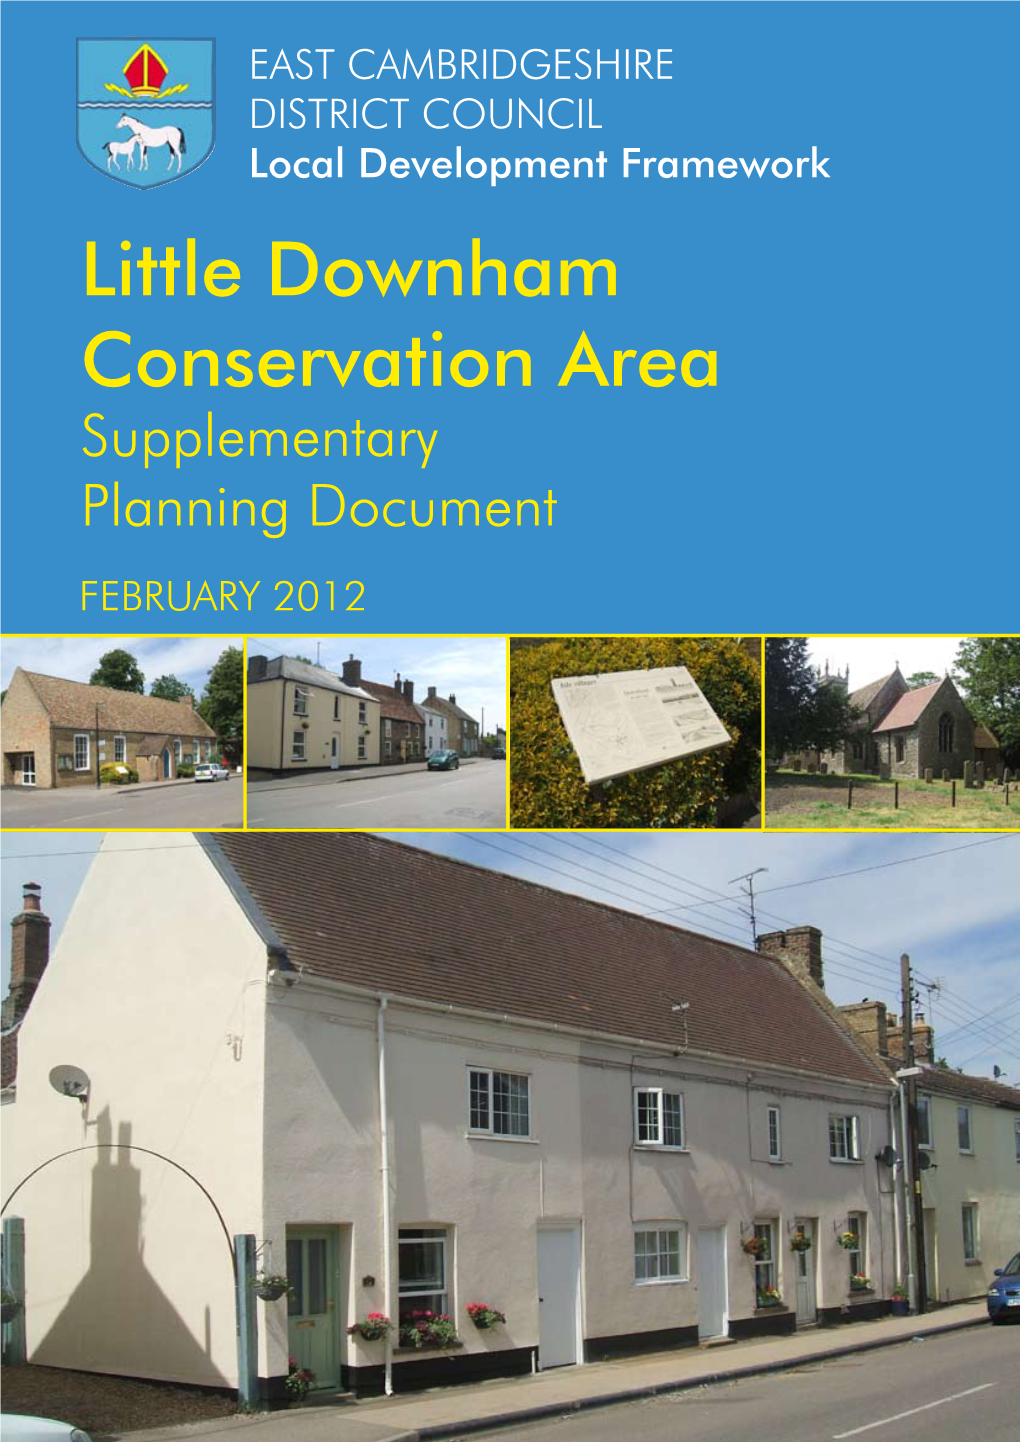 Little Downham Conservation Area Supplementary Planning Document FEBRUARY 2012 1 Introduction